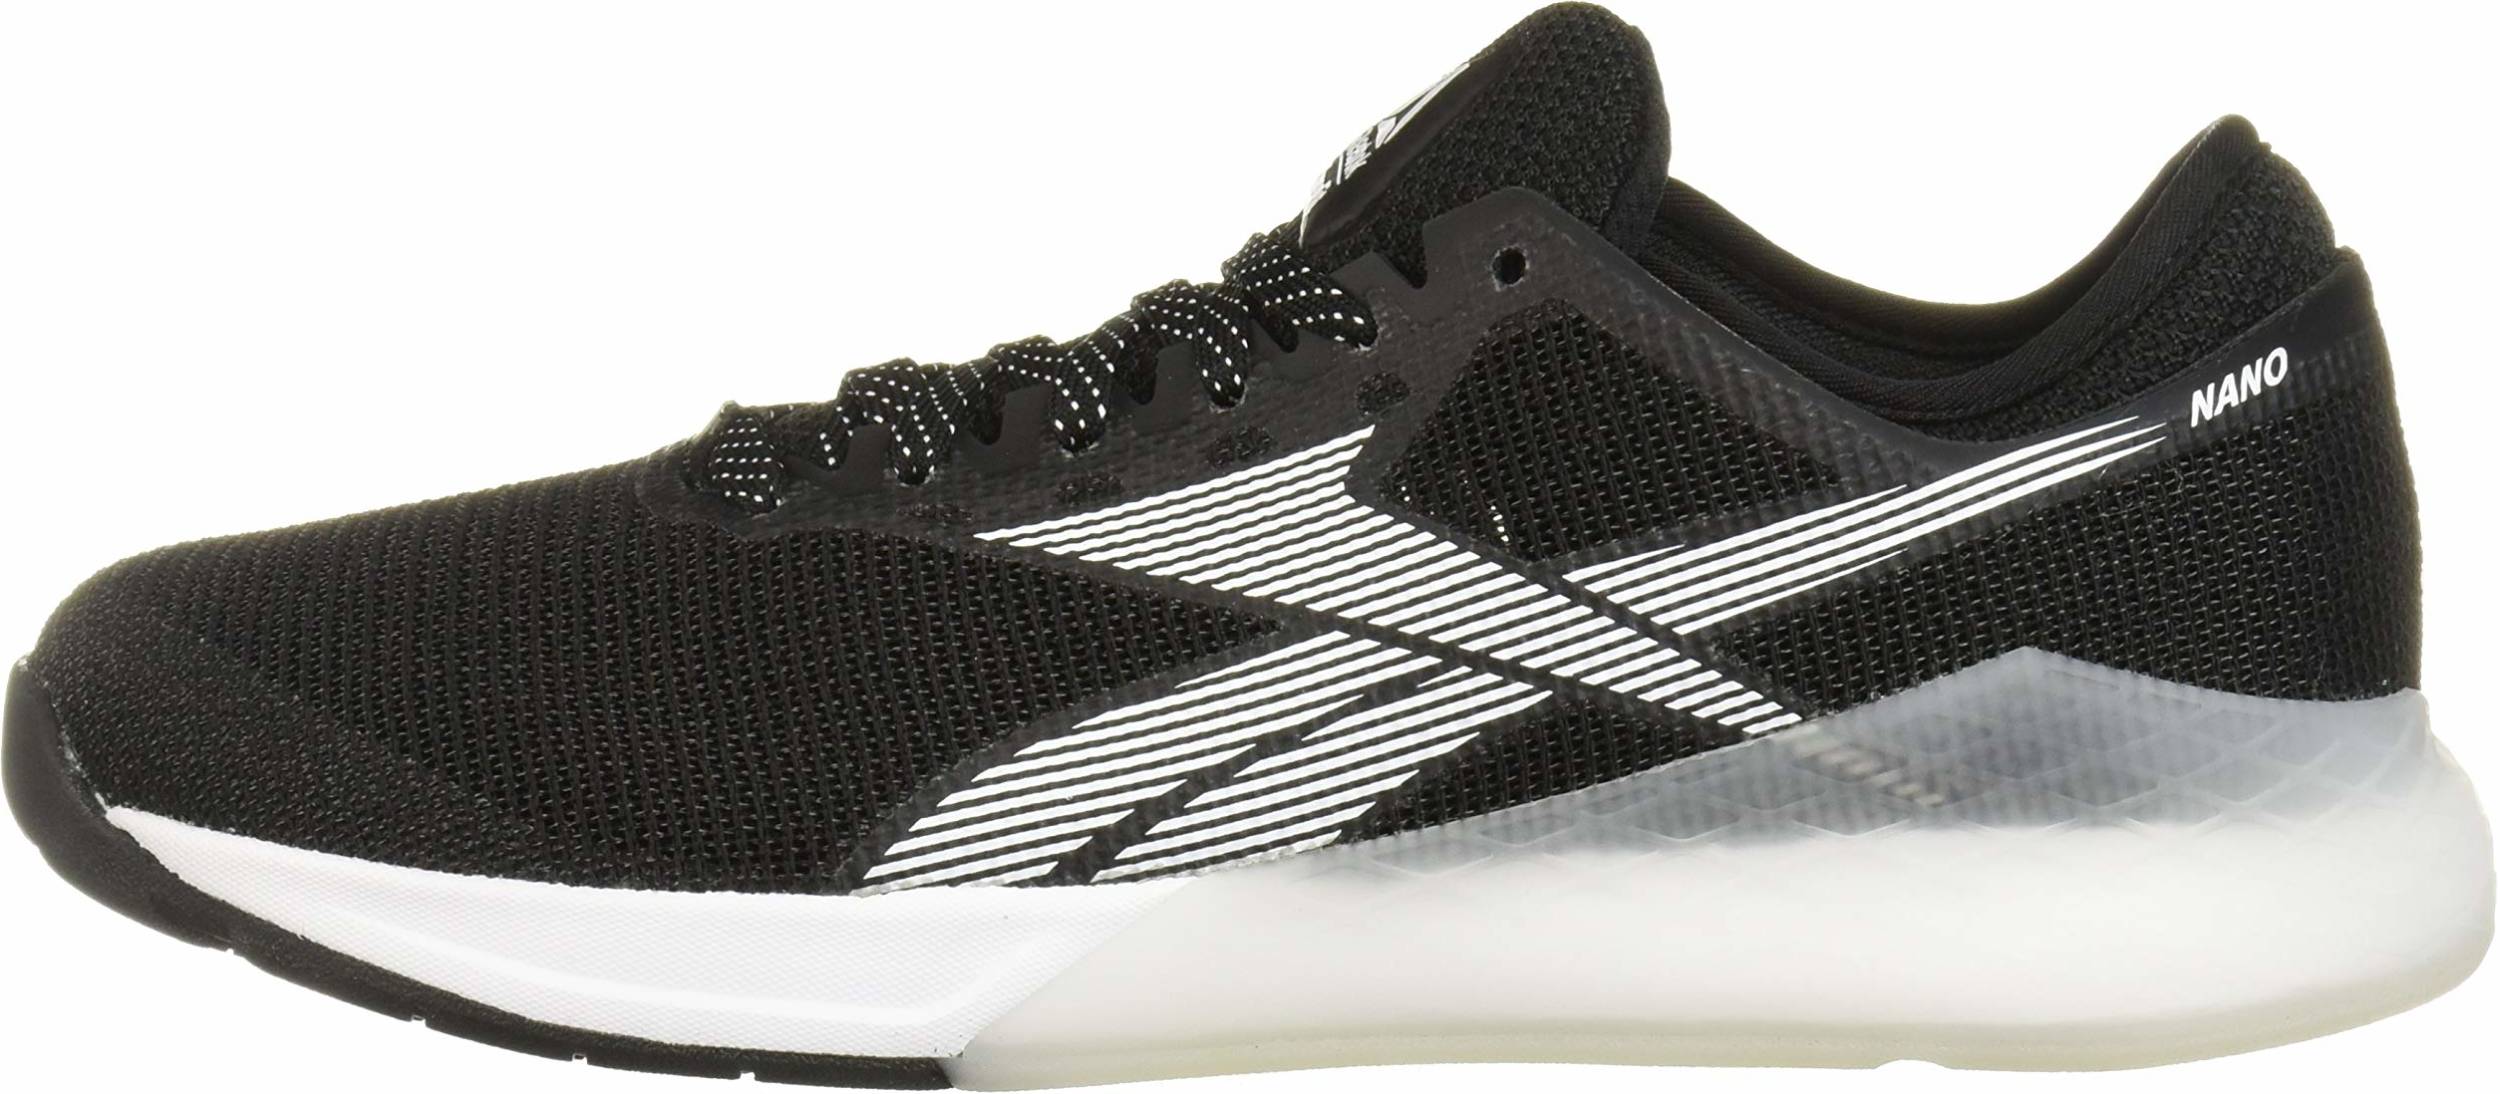 Save 51% on Crossfit Shoes (65 Models 